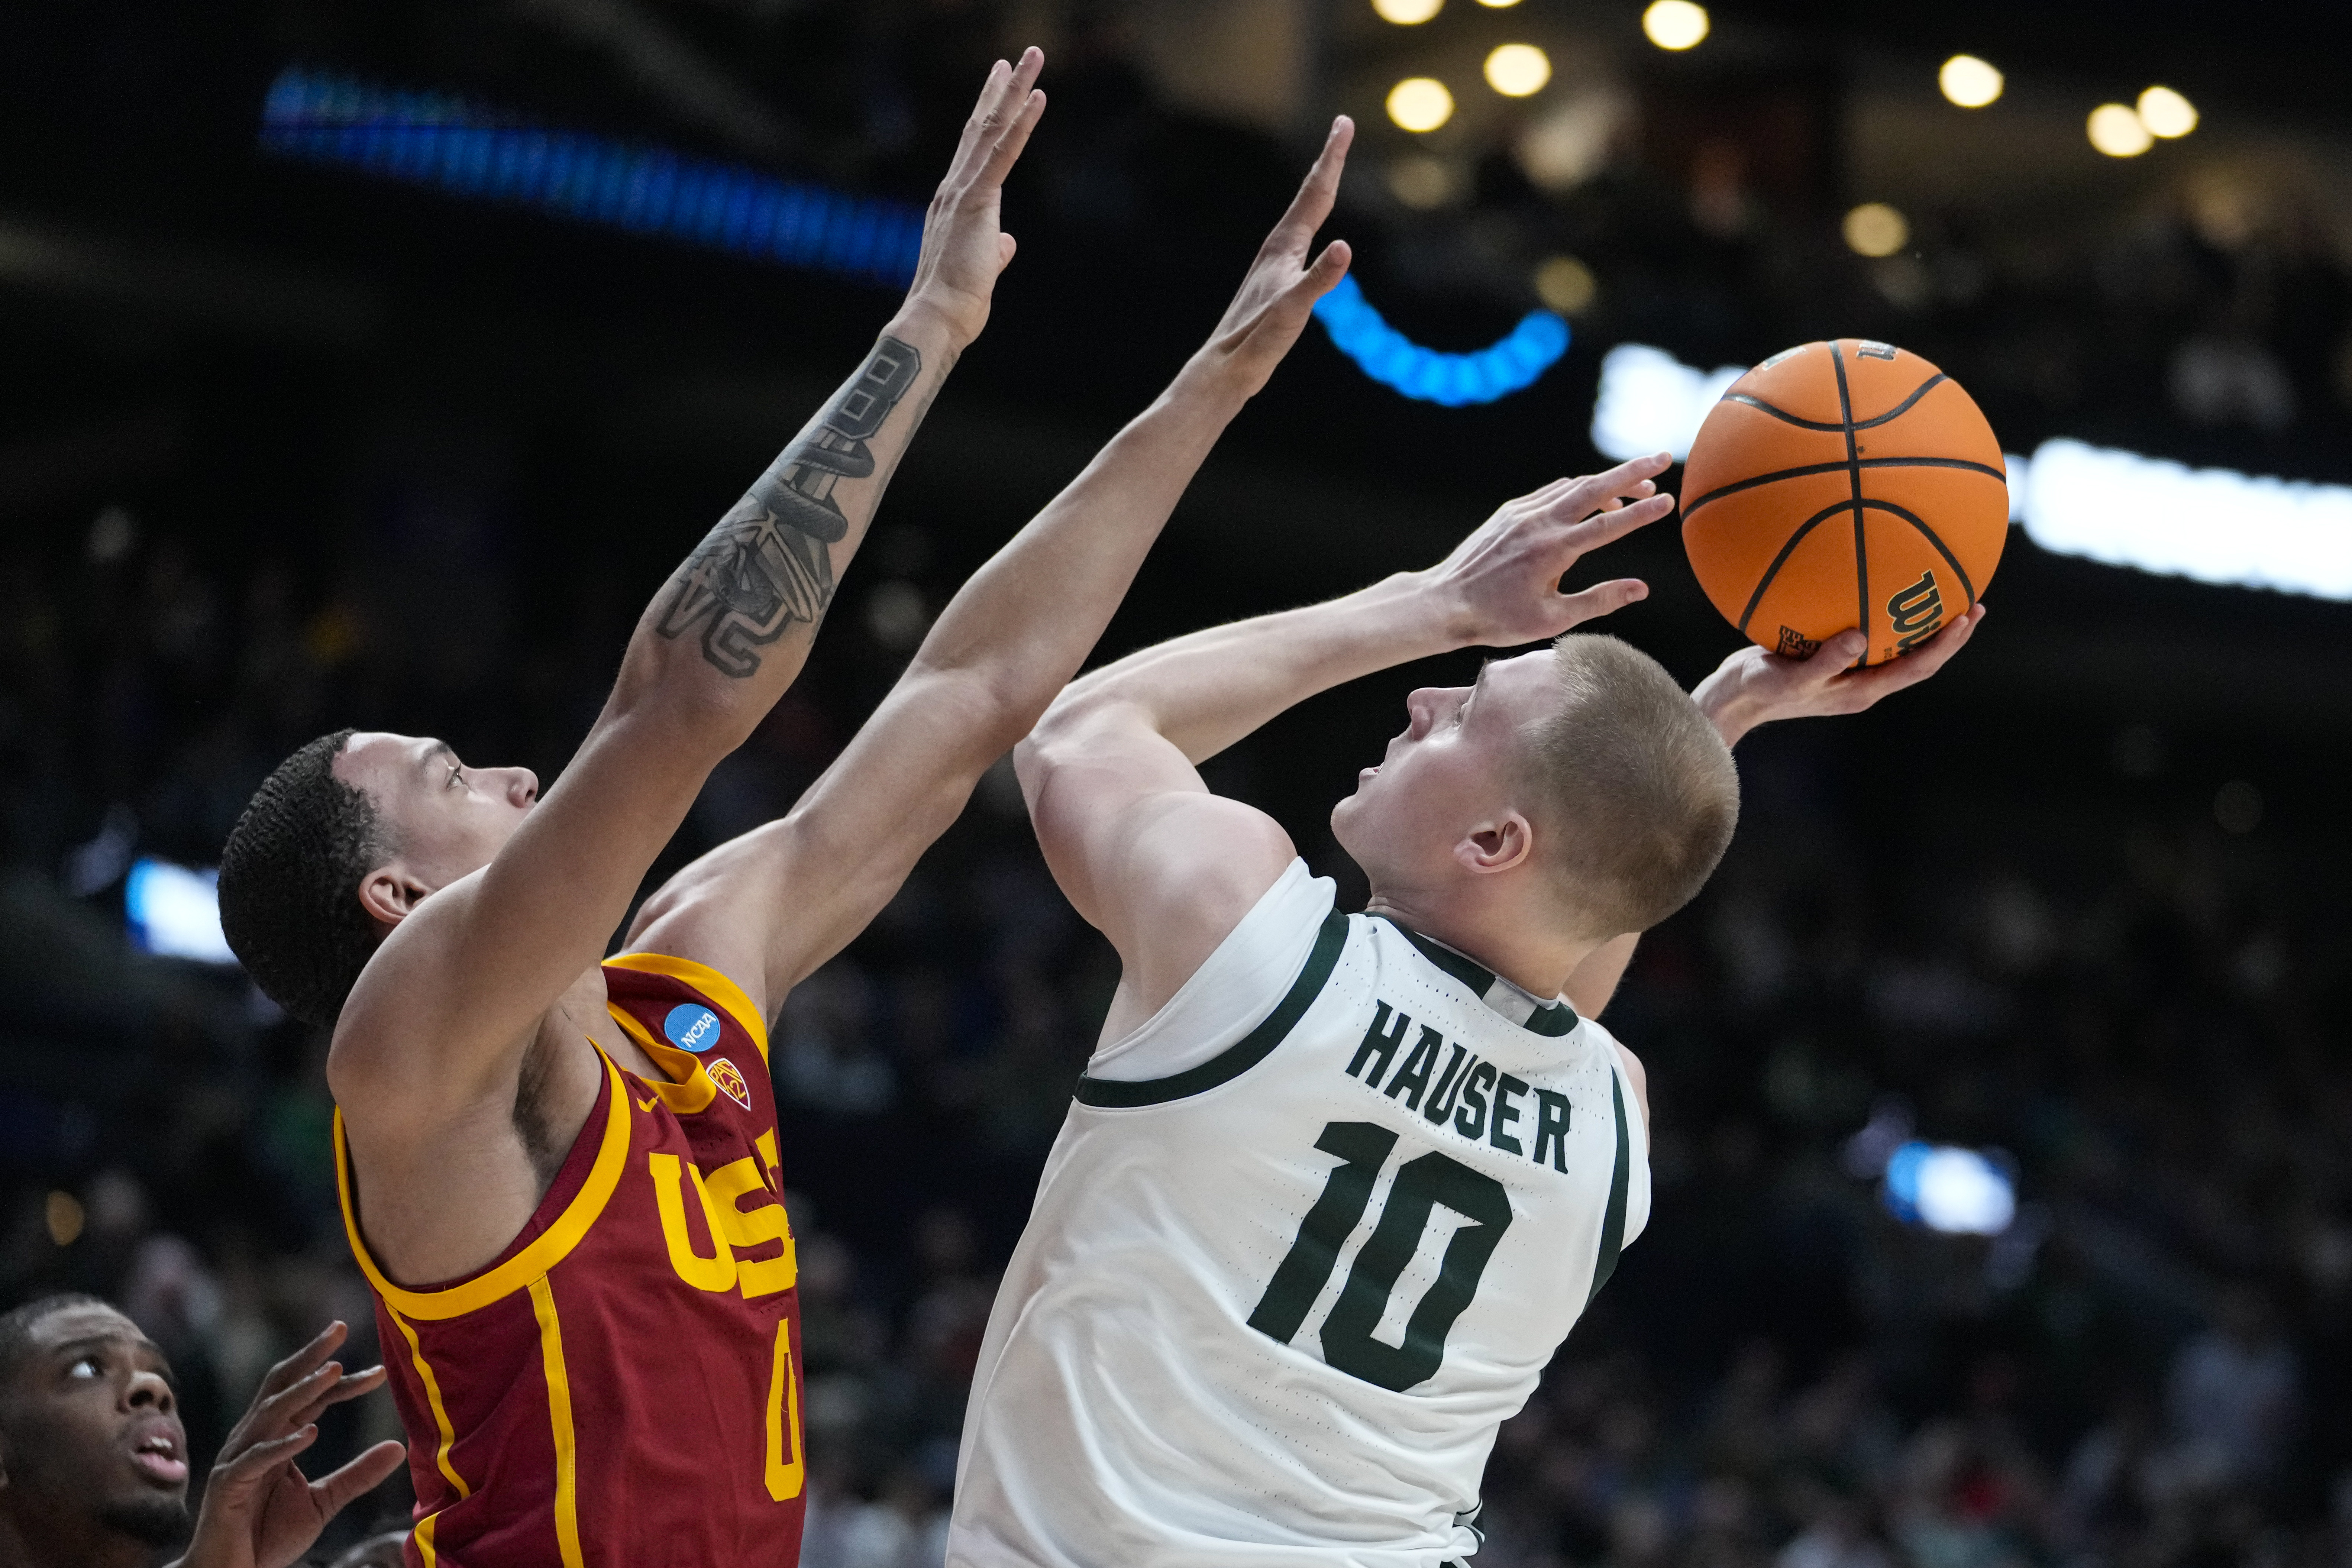 After disappointing COVID-19 season, Michigan State's Joey Hauser